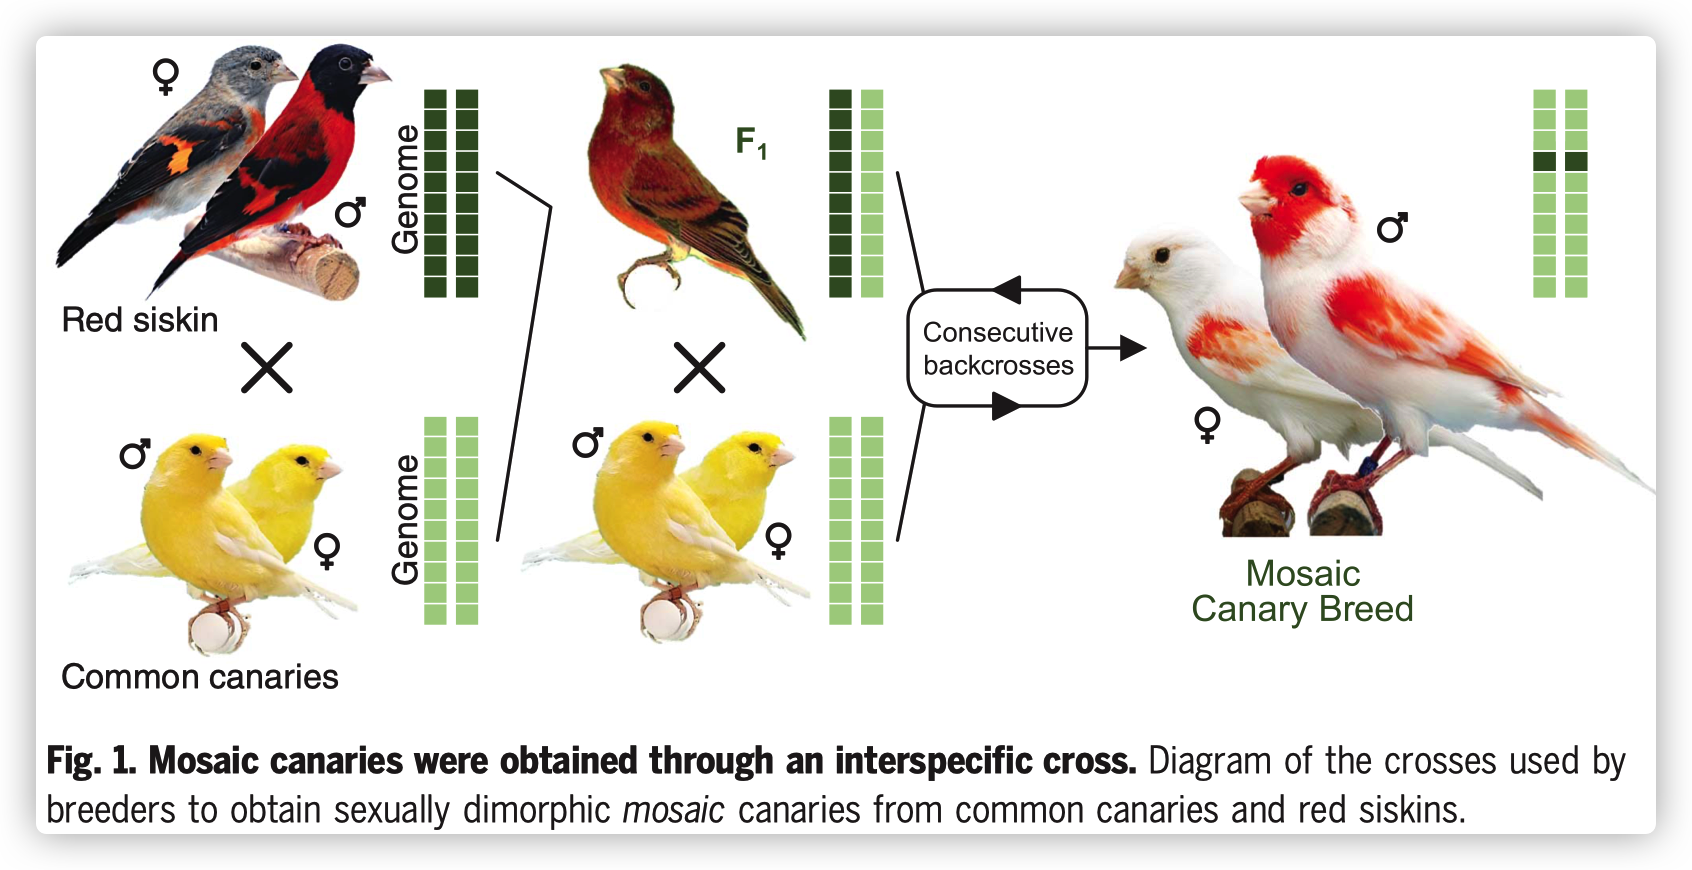 Fig. 1. Mosaic canaries were obtained through an interspecific cross.